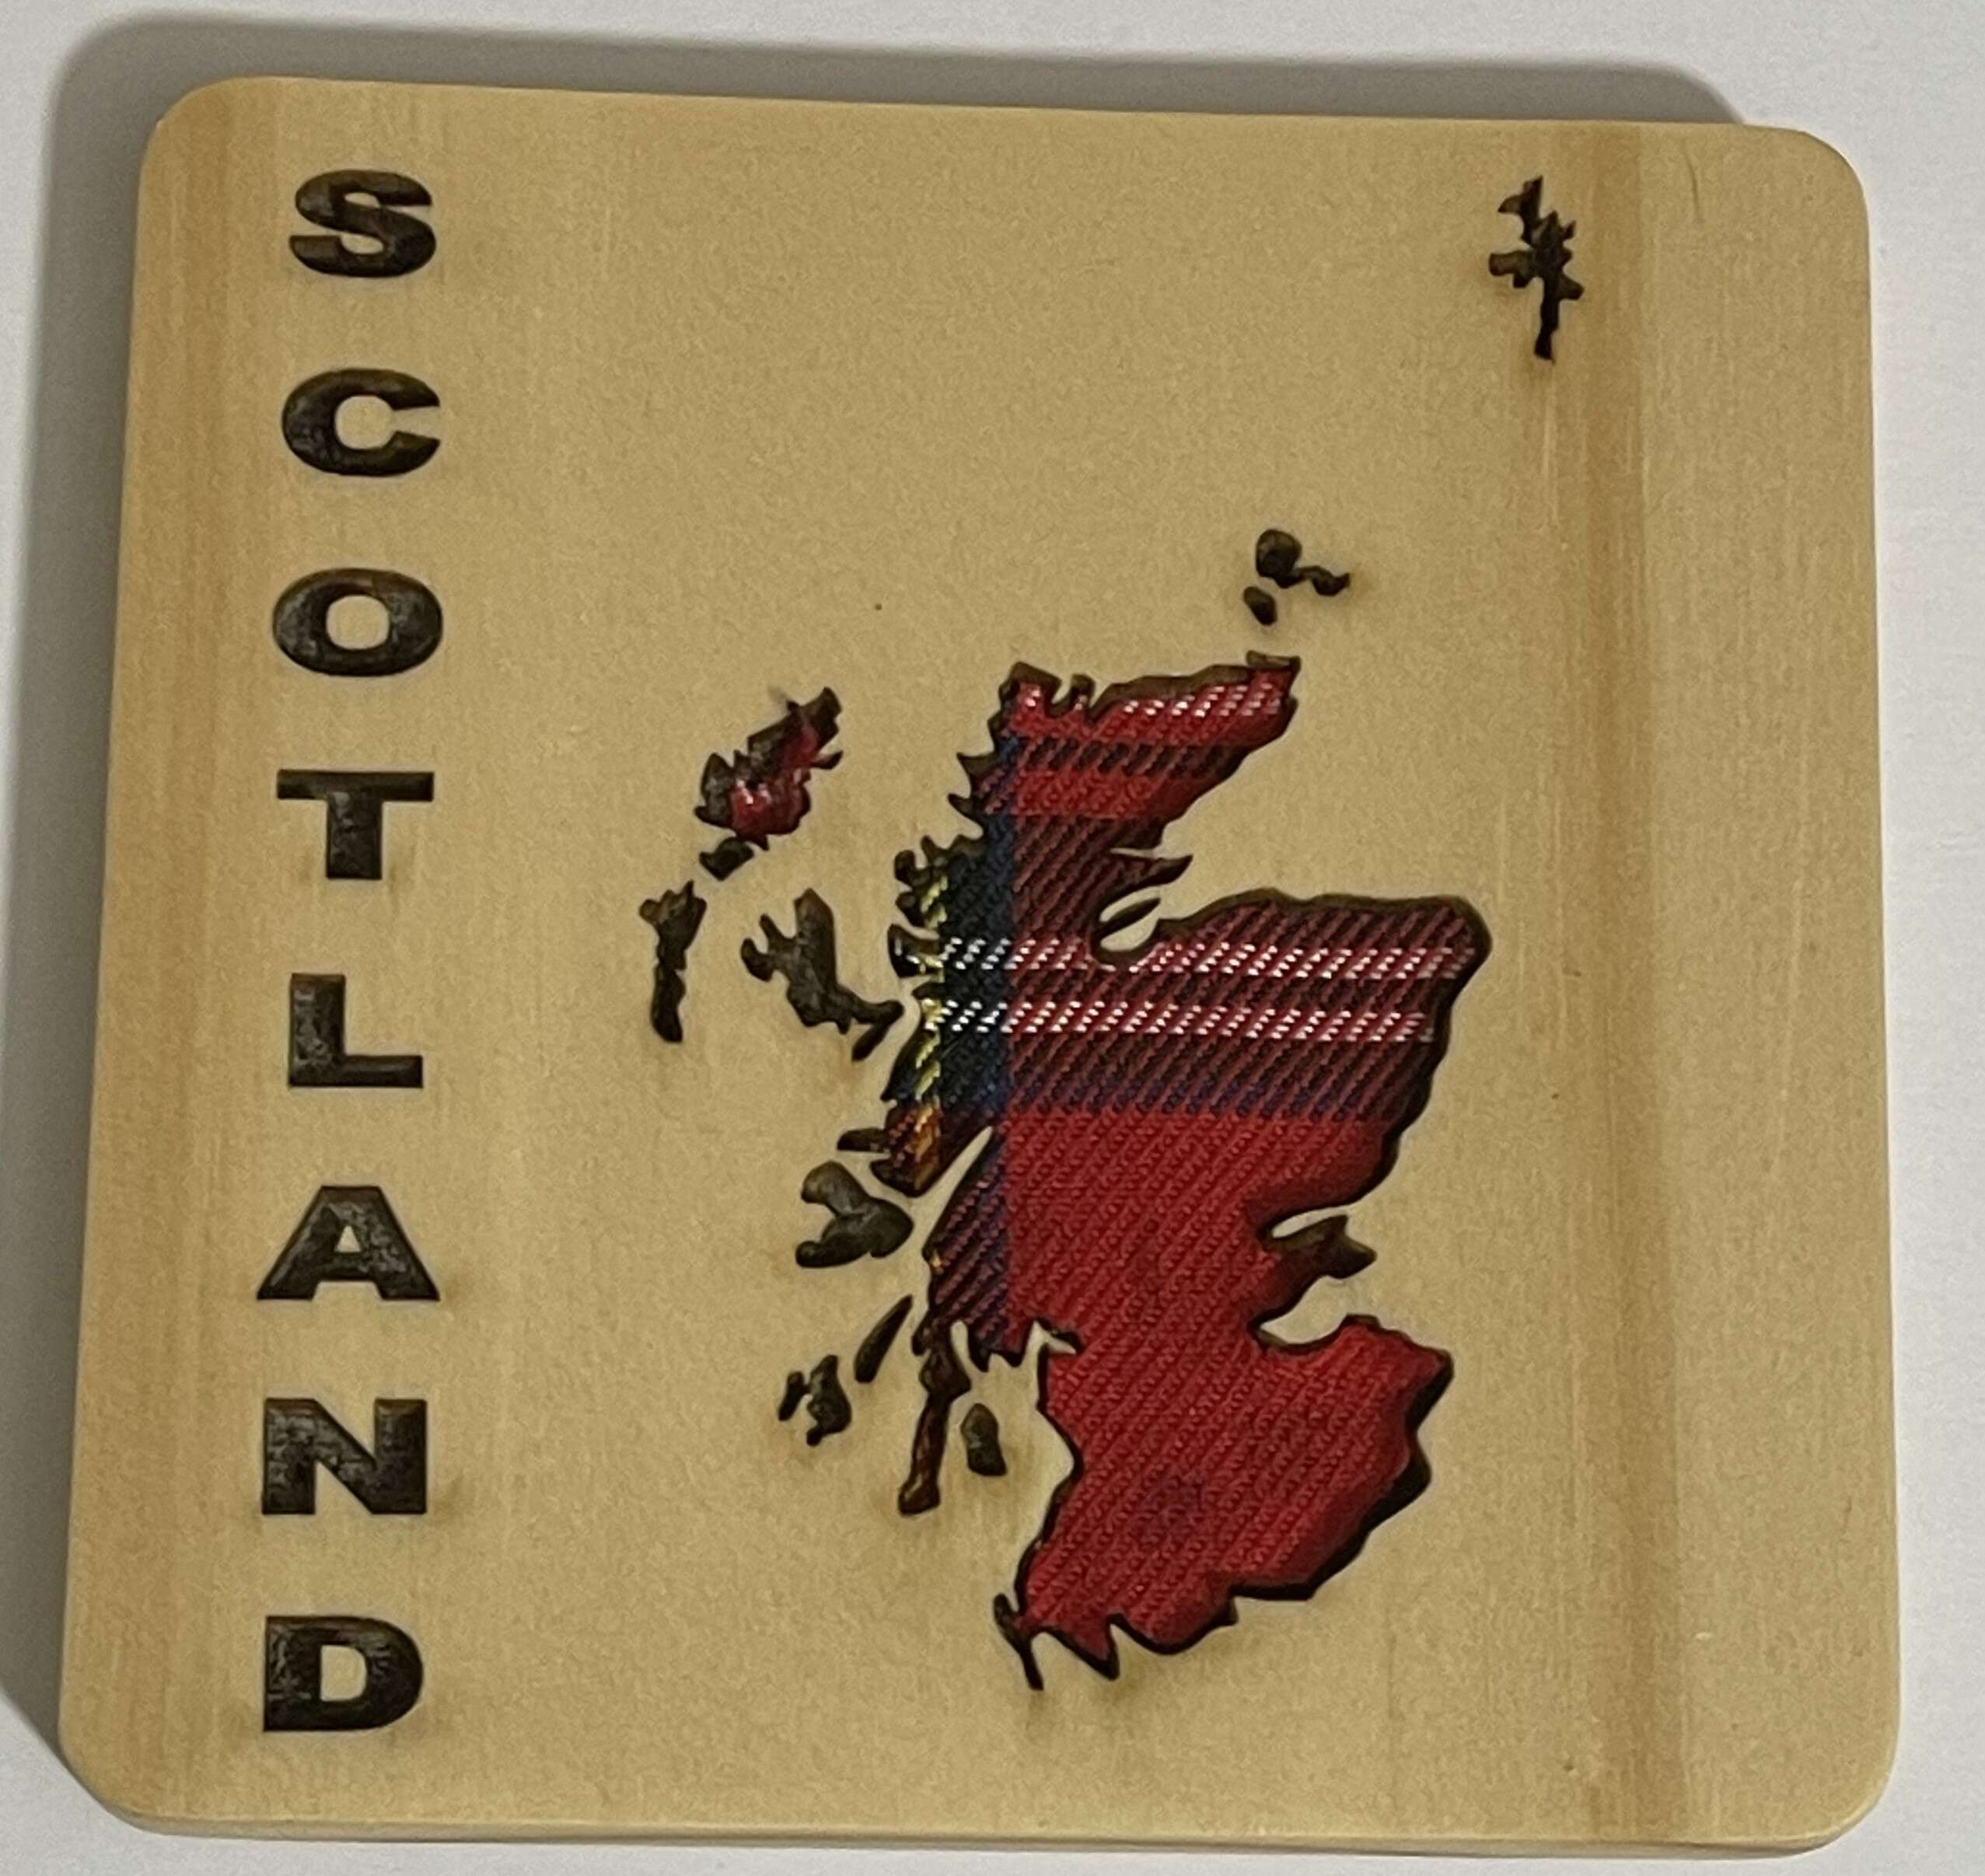 Solid Wood Coaster with image of Scotland